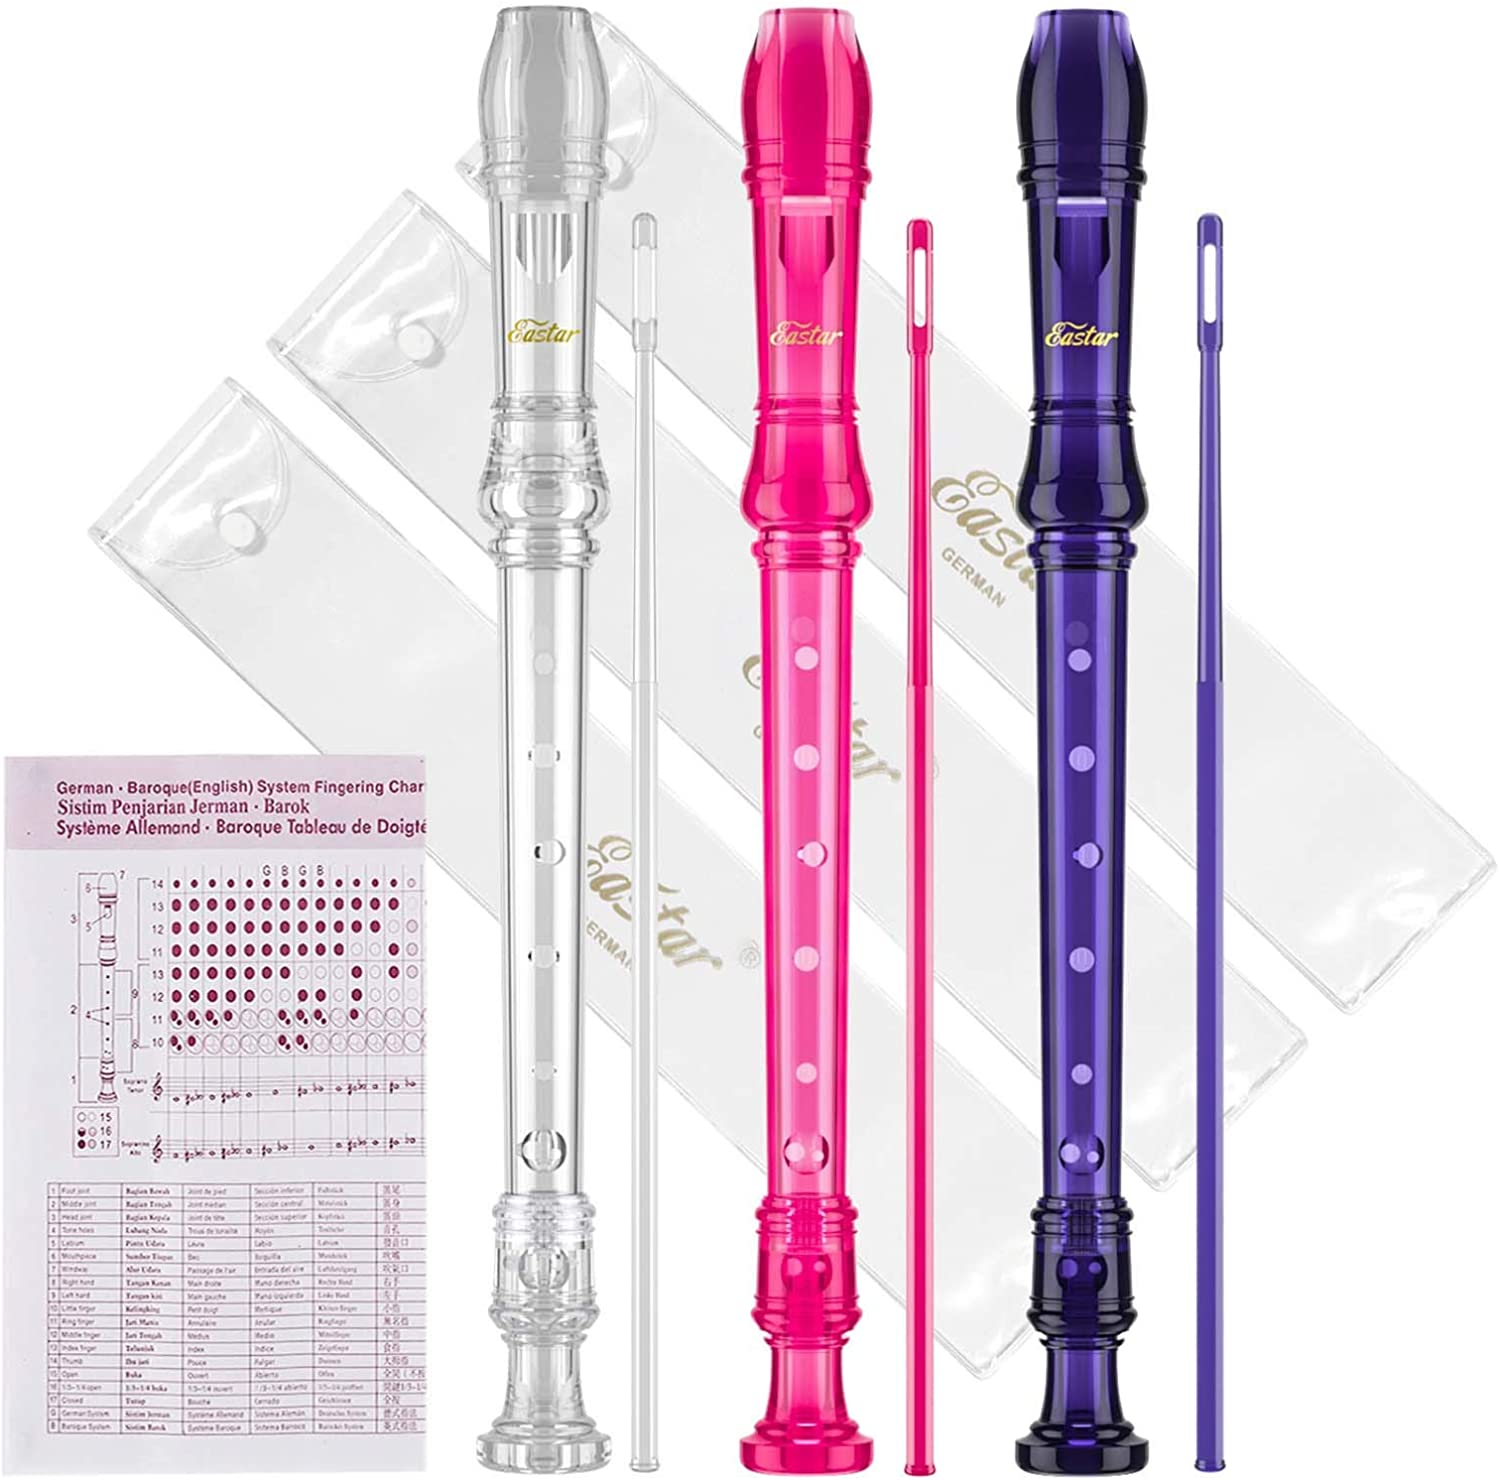 

Eastar ERS-3G1 3 PCS German Soprano Recorder 8 Hole C Key 3 Piece Instrument With Fingering Chart Cleaning Rod and Bag,Transparent Pink Purple